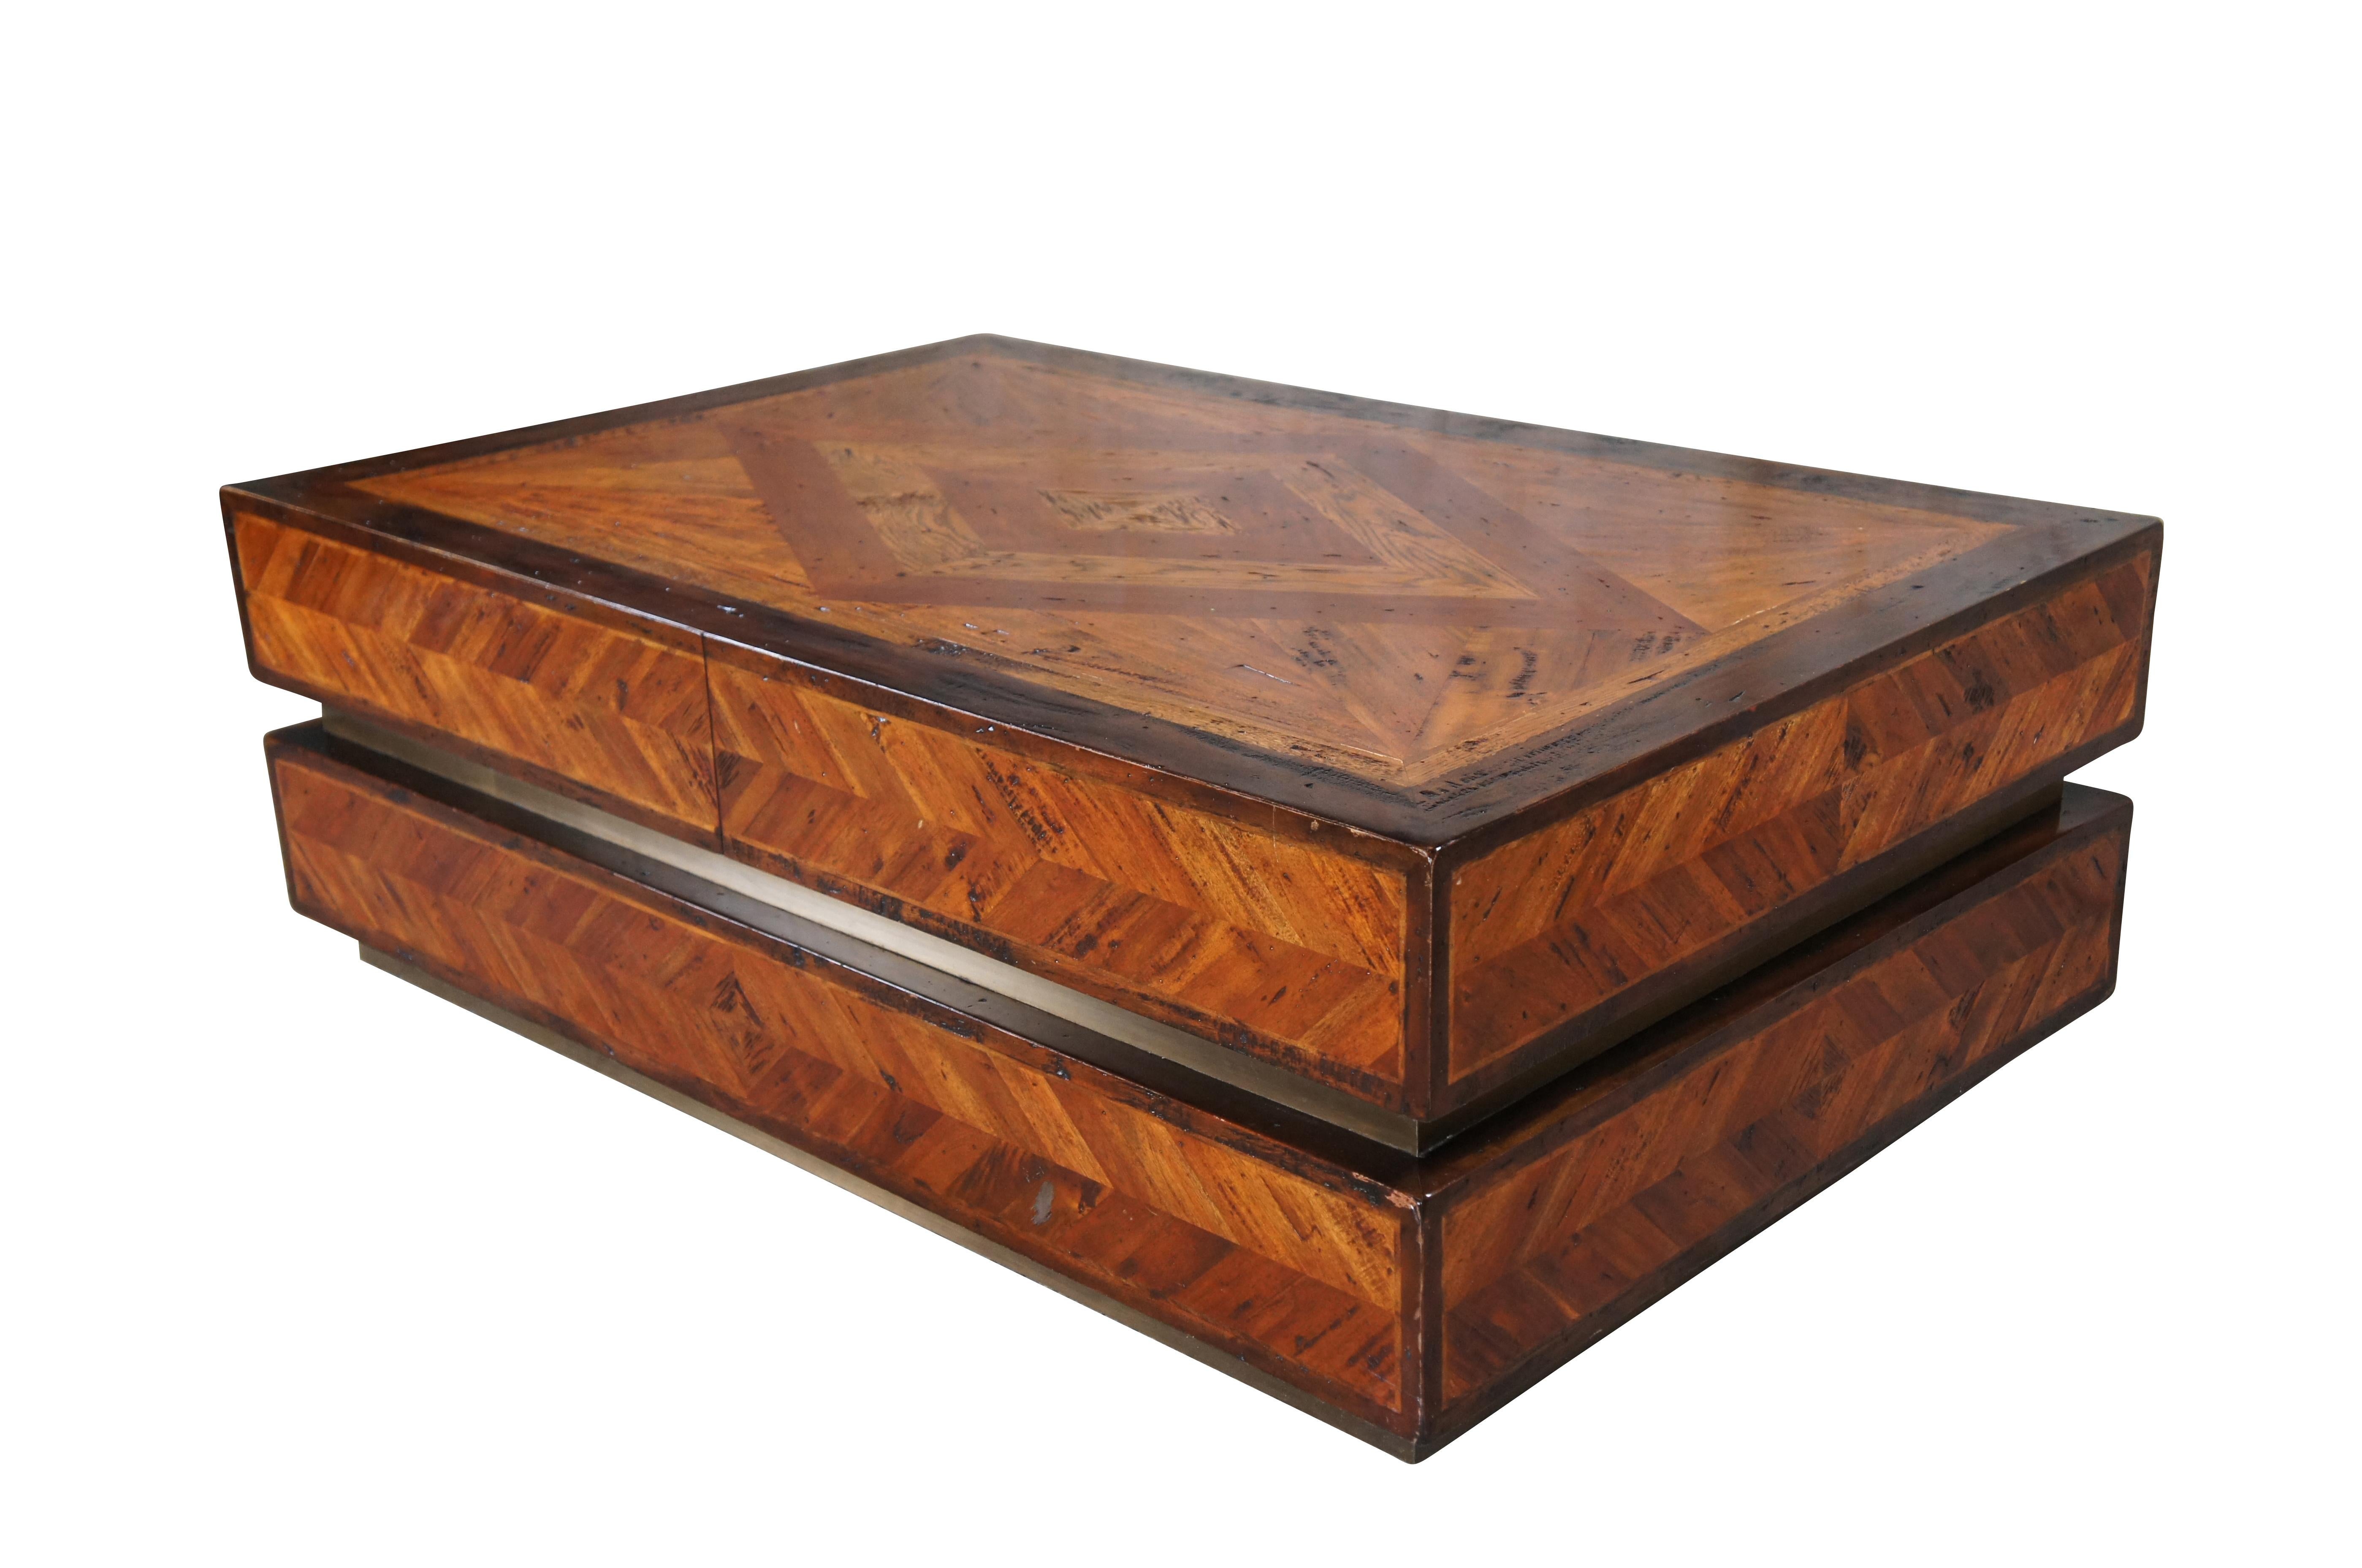 Vintage Theodore Alexander Brunello Sera Cocktail Table; 5100-182. Features a geometric lozenge parquetry fashioned out of hand selected acacia, oak and parawood. Concealed drawers provide storage space without detracting from the look of the piece,